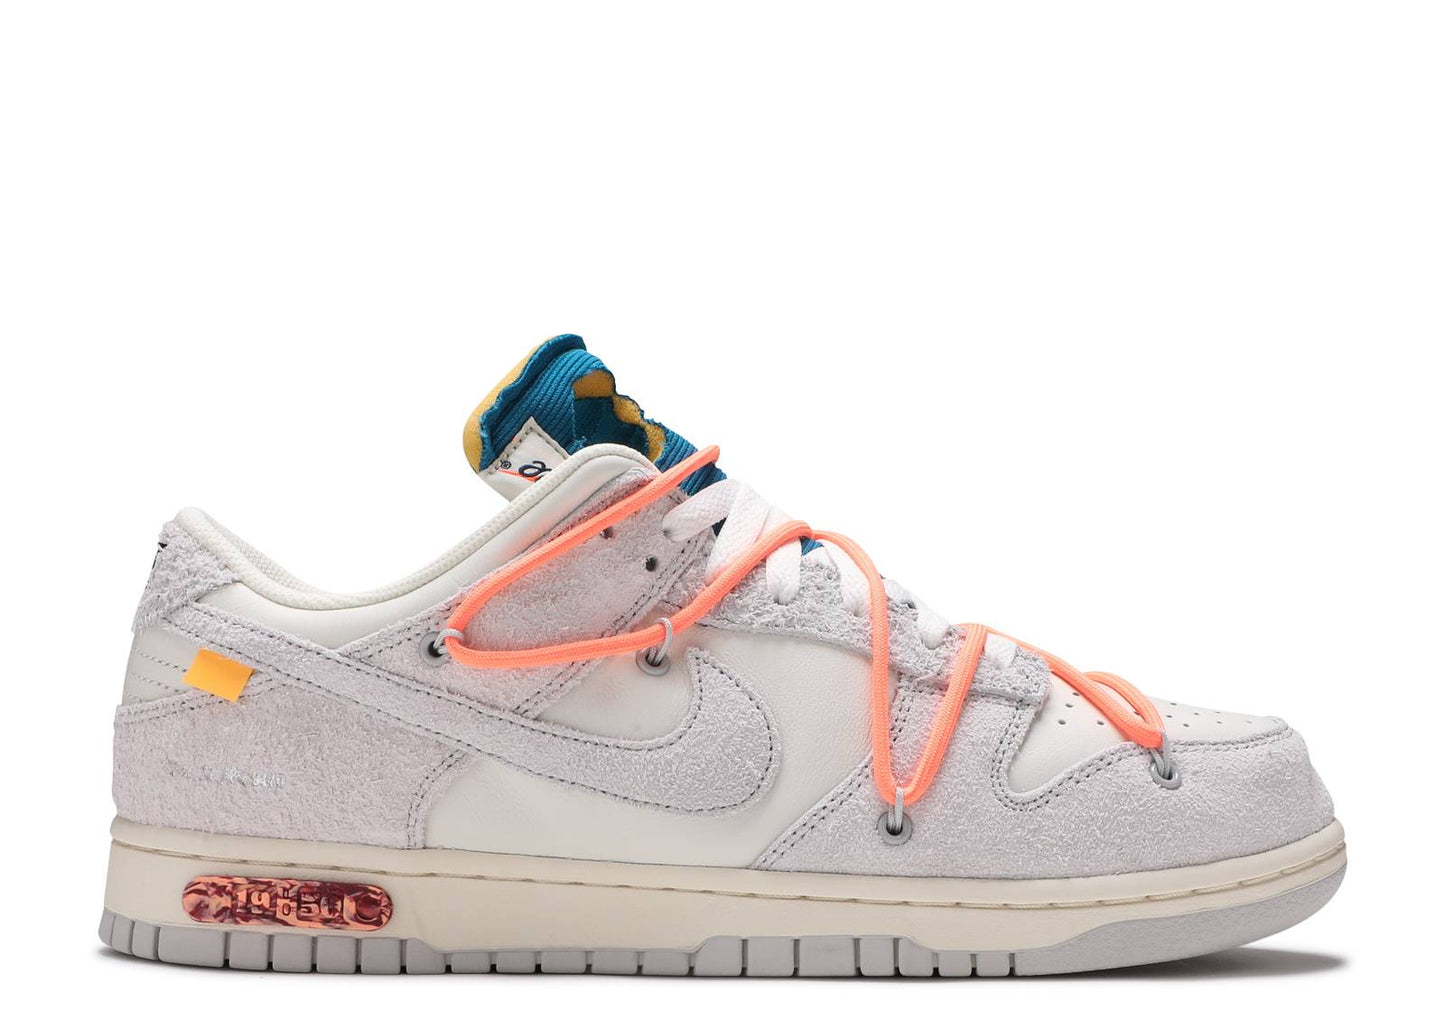 Off-White x Nike Dunk Low "Dear Summer - Lot 19 of 50"